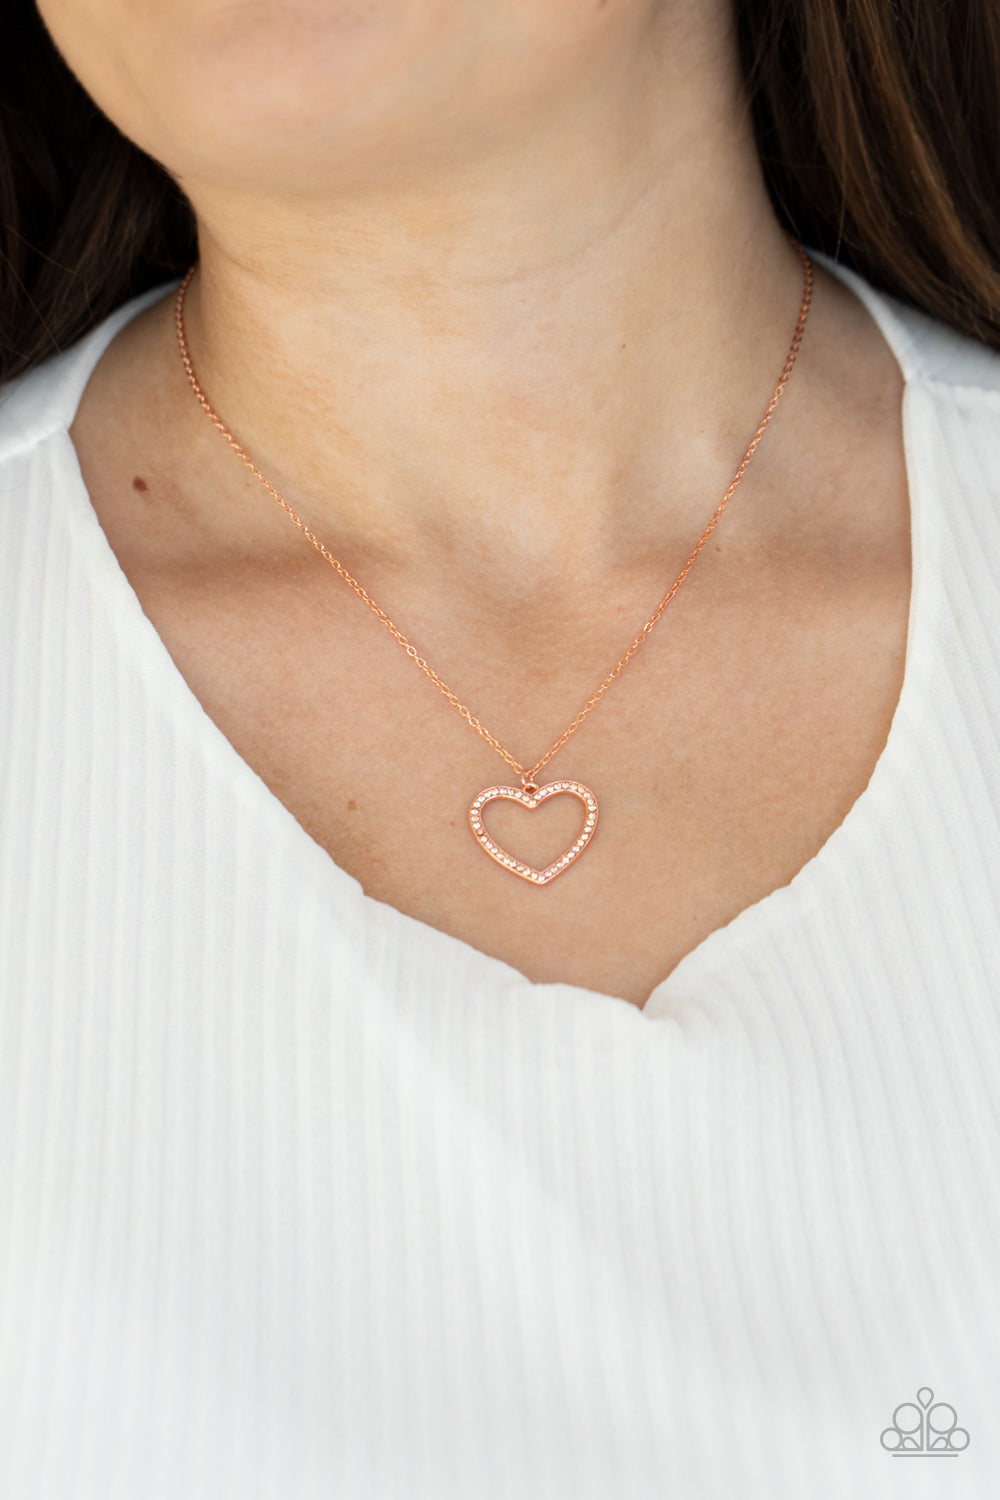 GLOW by Heart Necklace - Copper